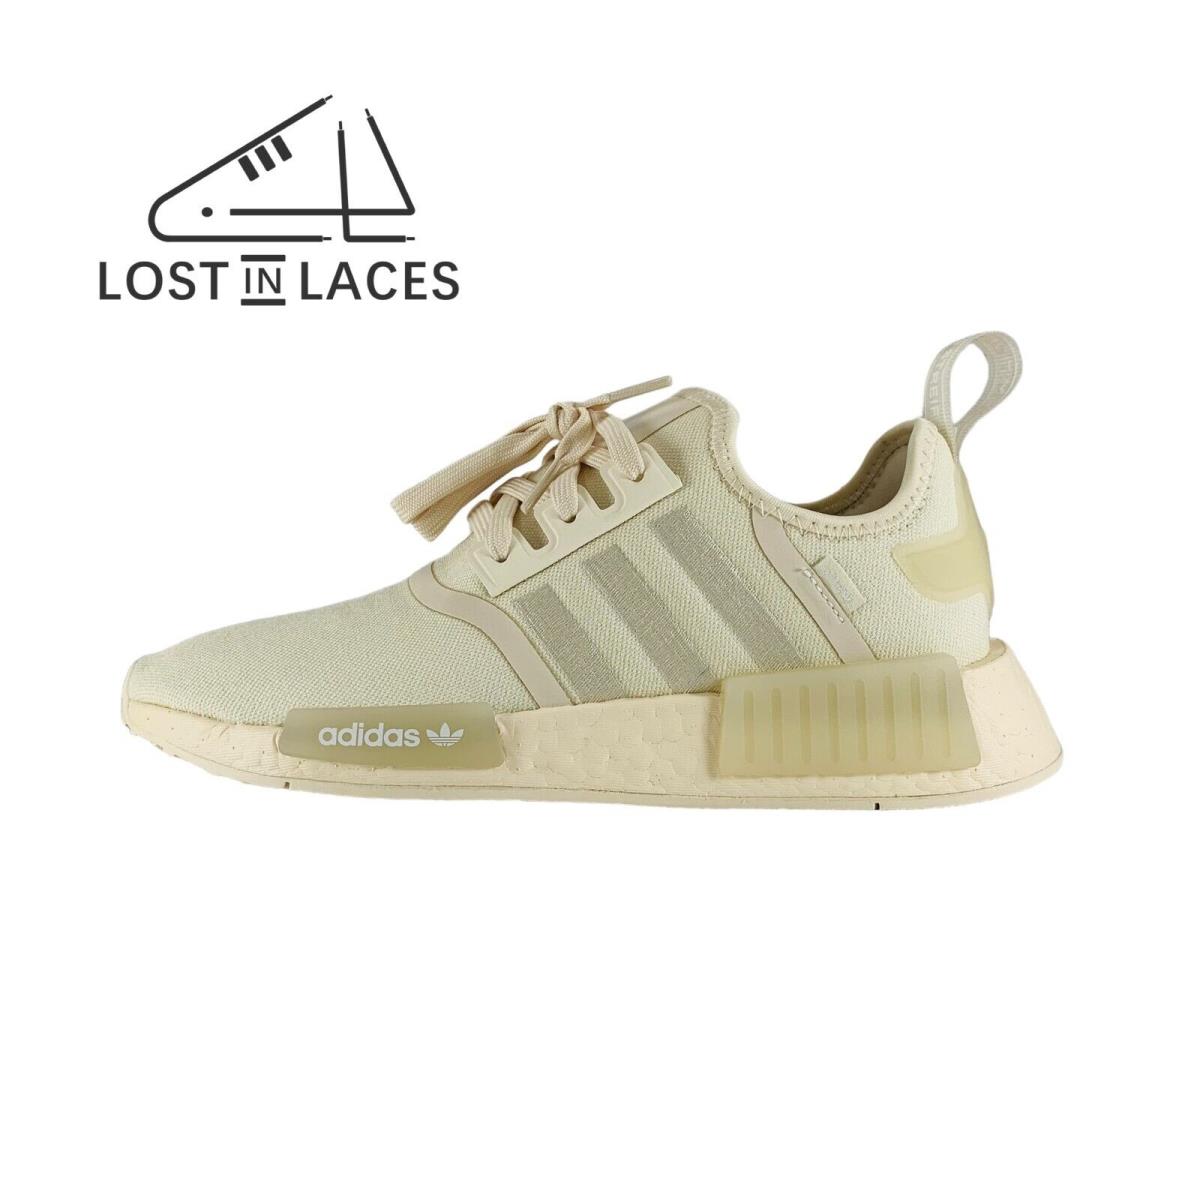 Adidas NMD_R1 Wonder White Beige Sneakers Shoes HQ4248 Women`s Sizes